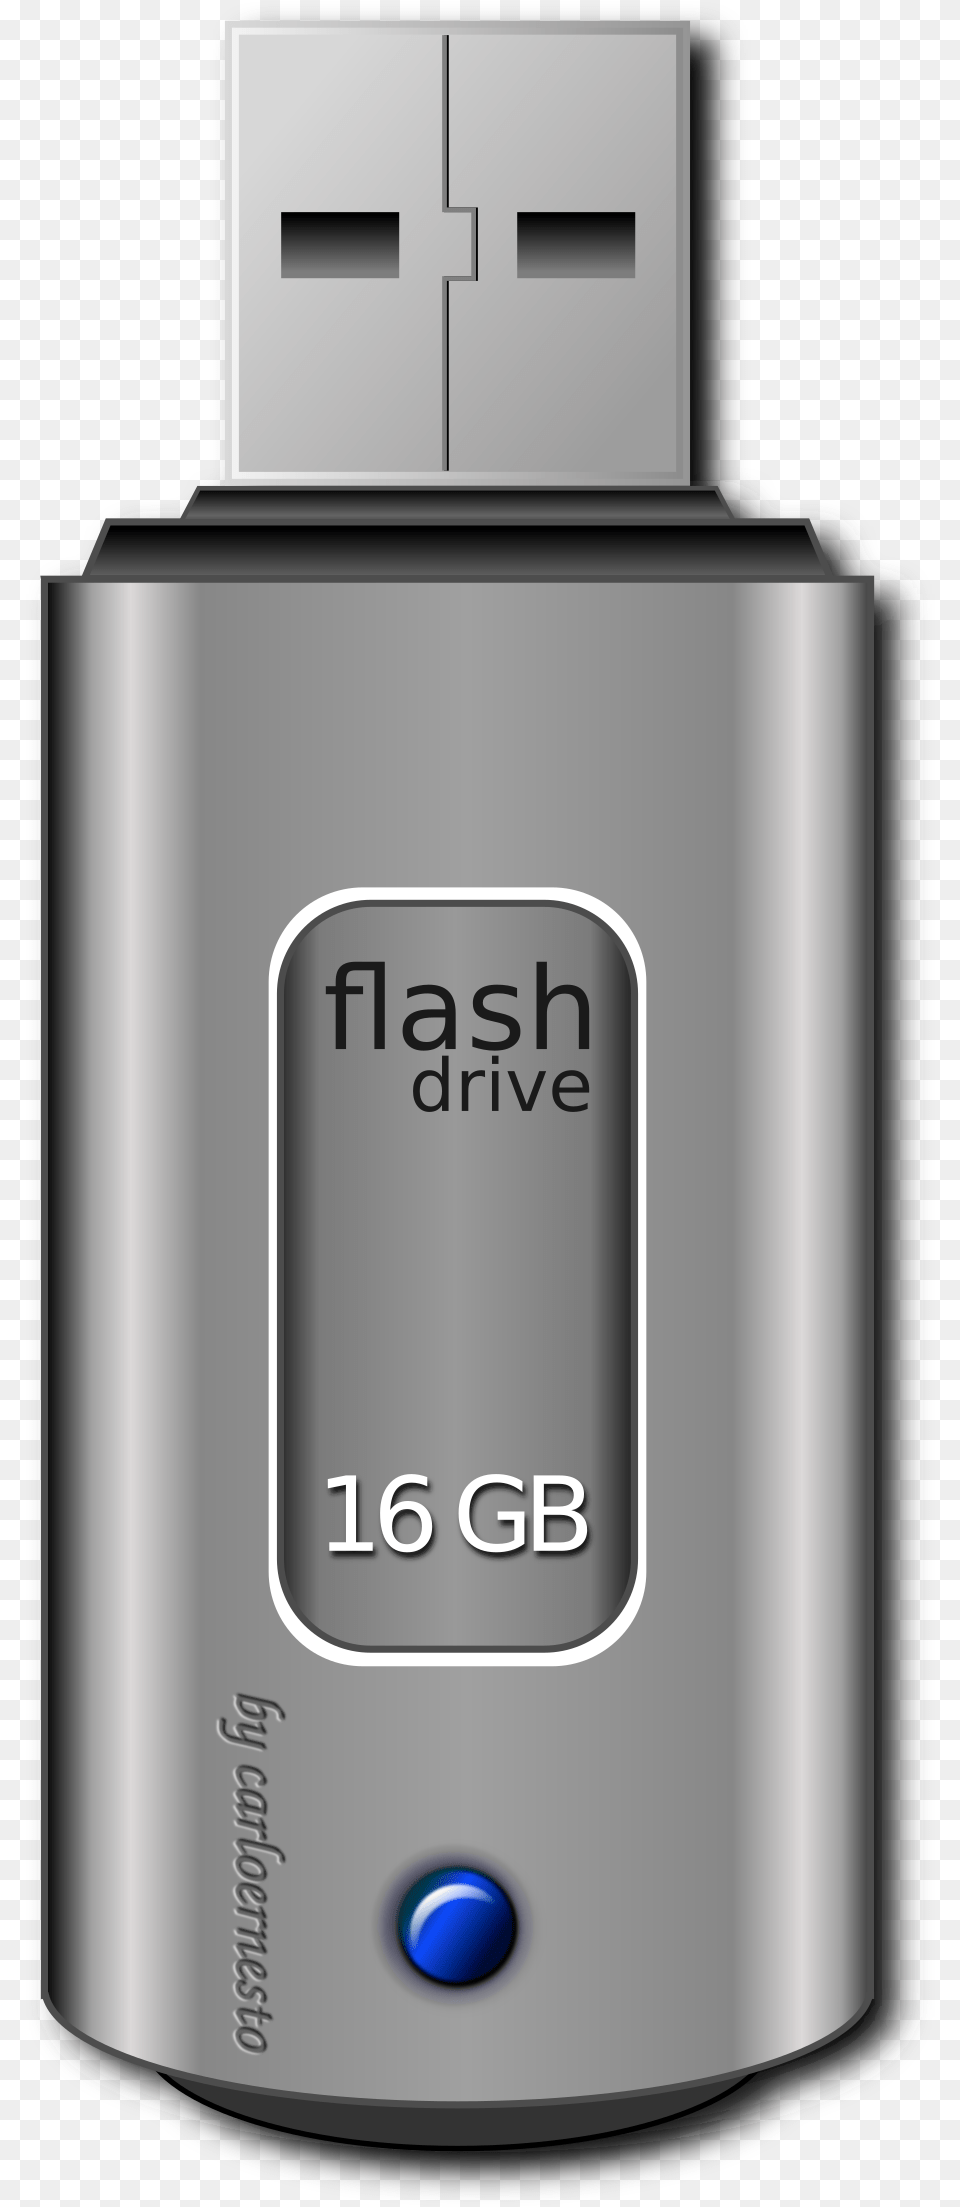 To Use Ampamp Public Domain Flash Drive Clip Art Icon Flash Drive Usb, Computer Hardware, Electronics, Hardware, Monitor Free Png Download